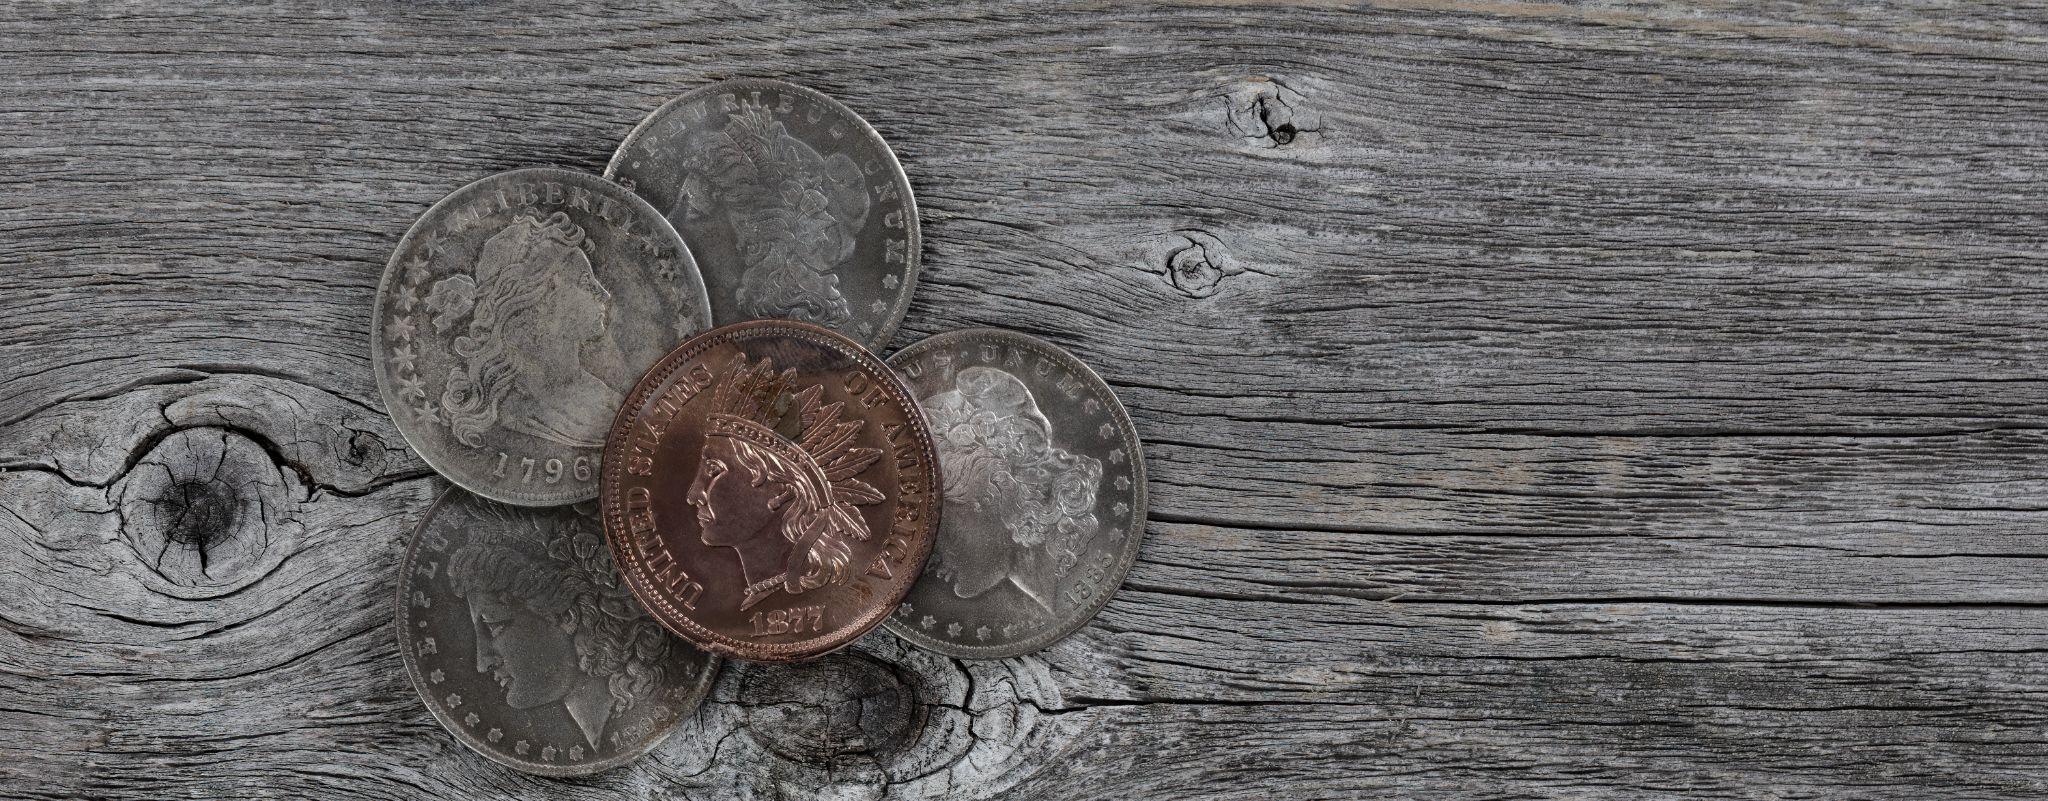 USA vintage coins on rustic wood in a close up view.